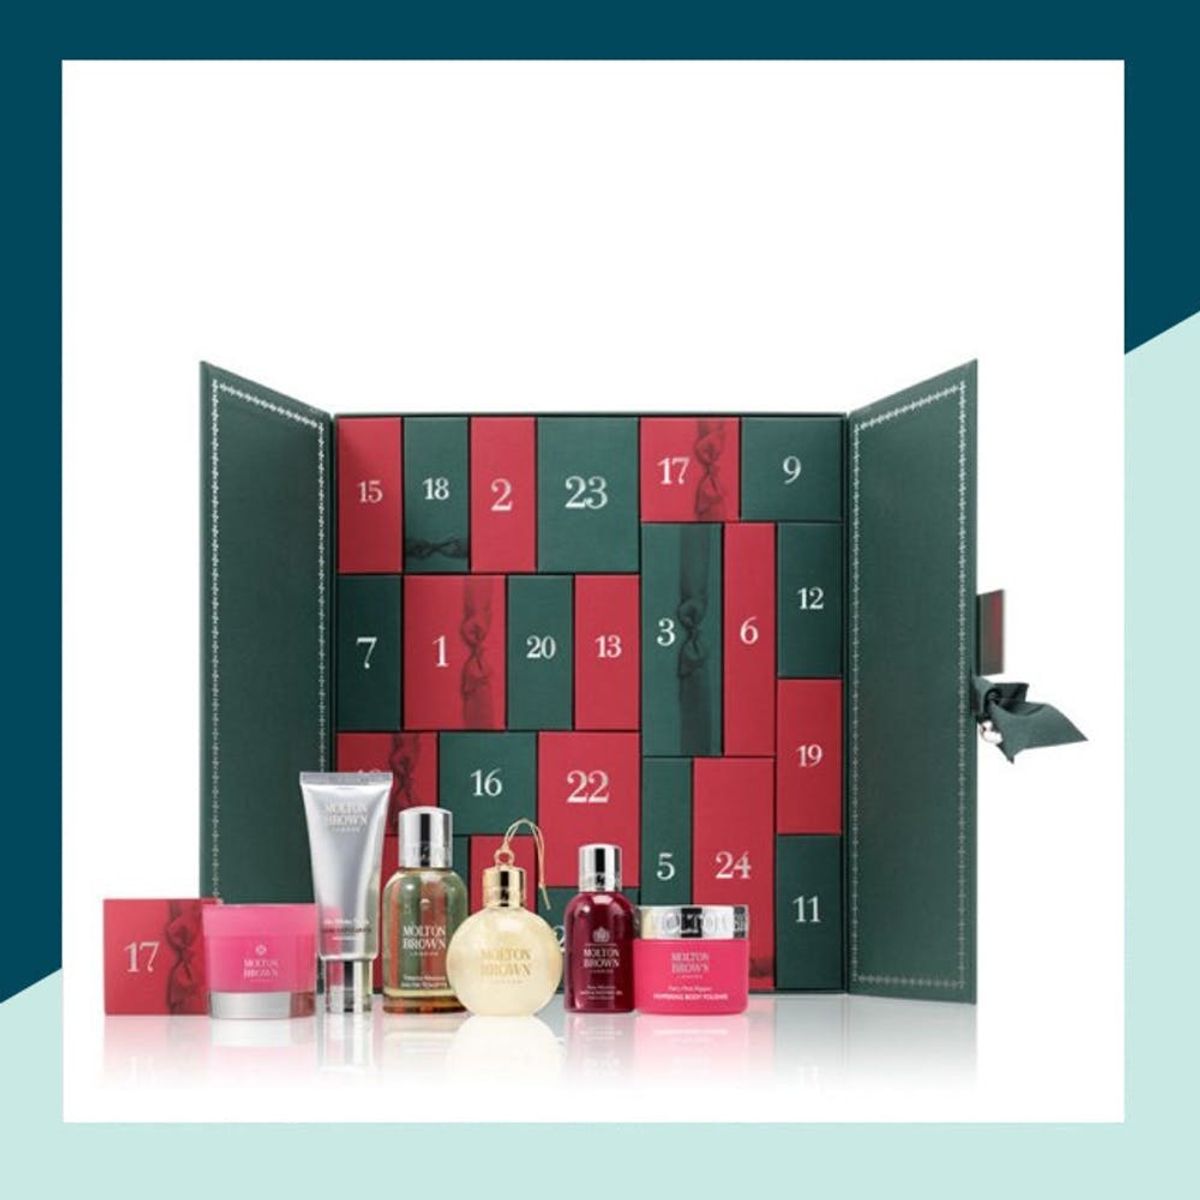 Beauty Advent Calendars Are Here for Your Holiday 2017 Countdown